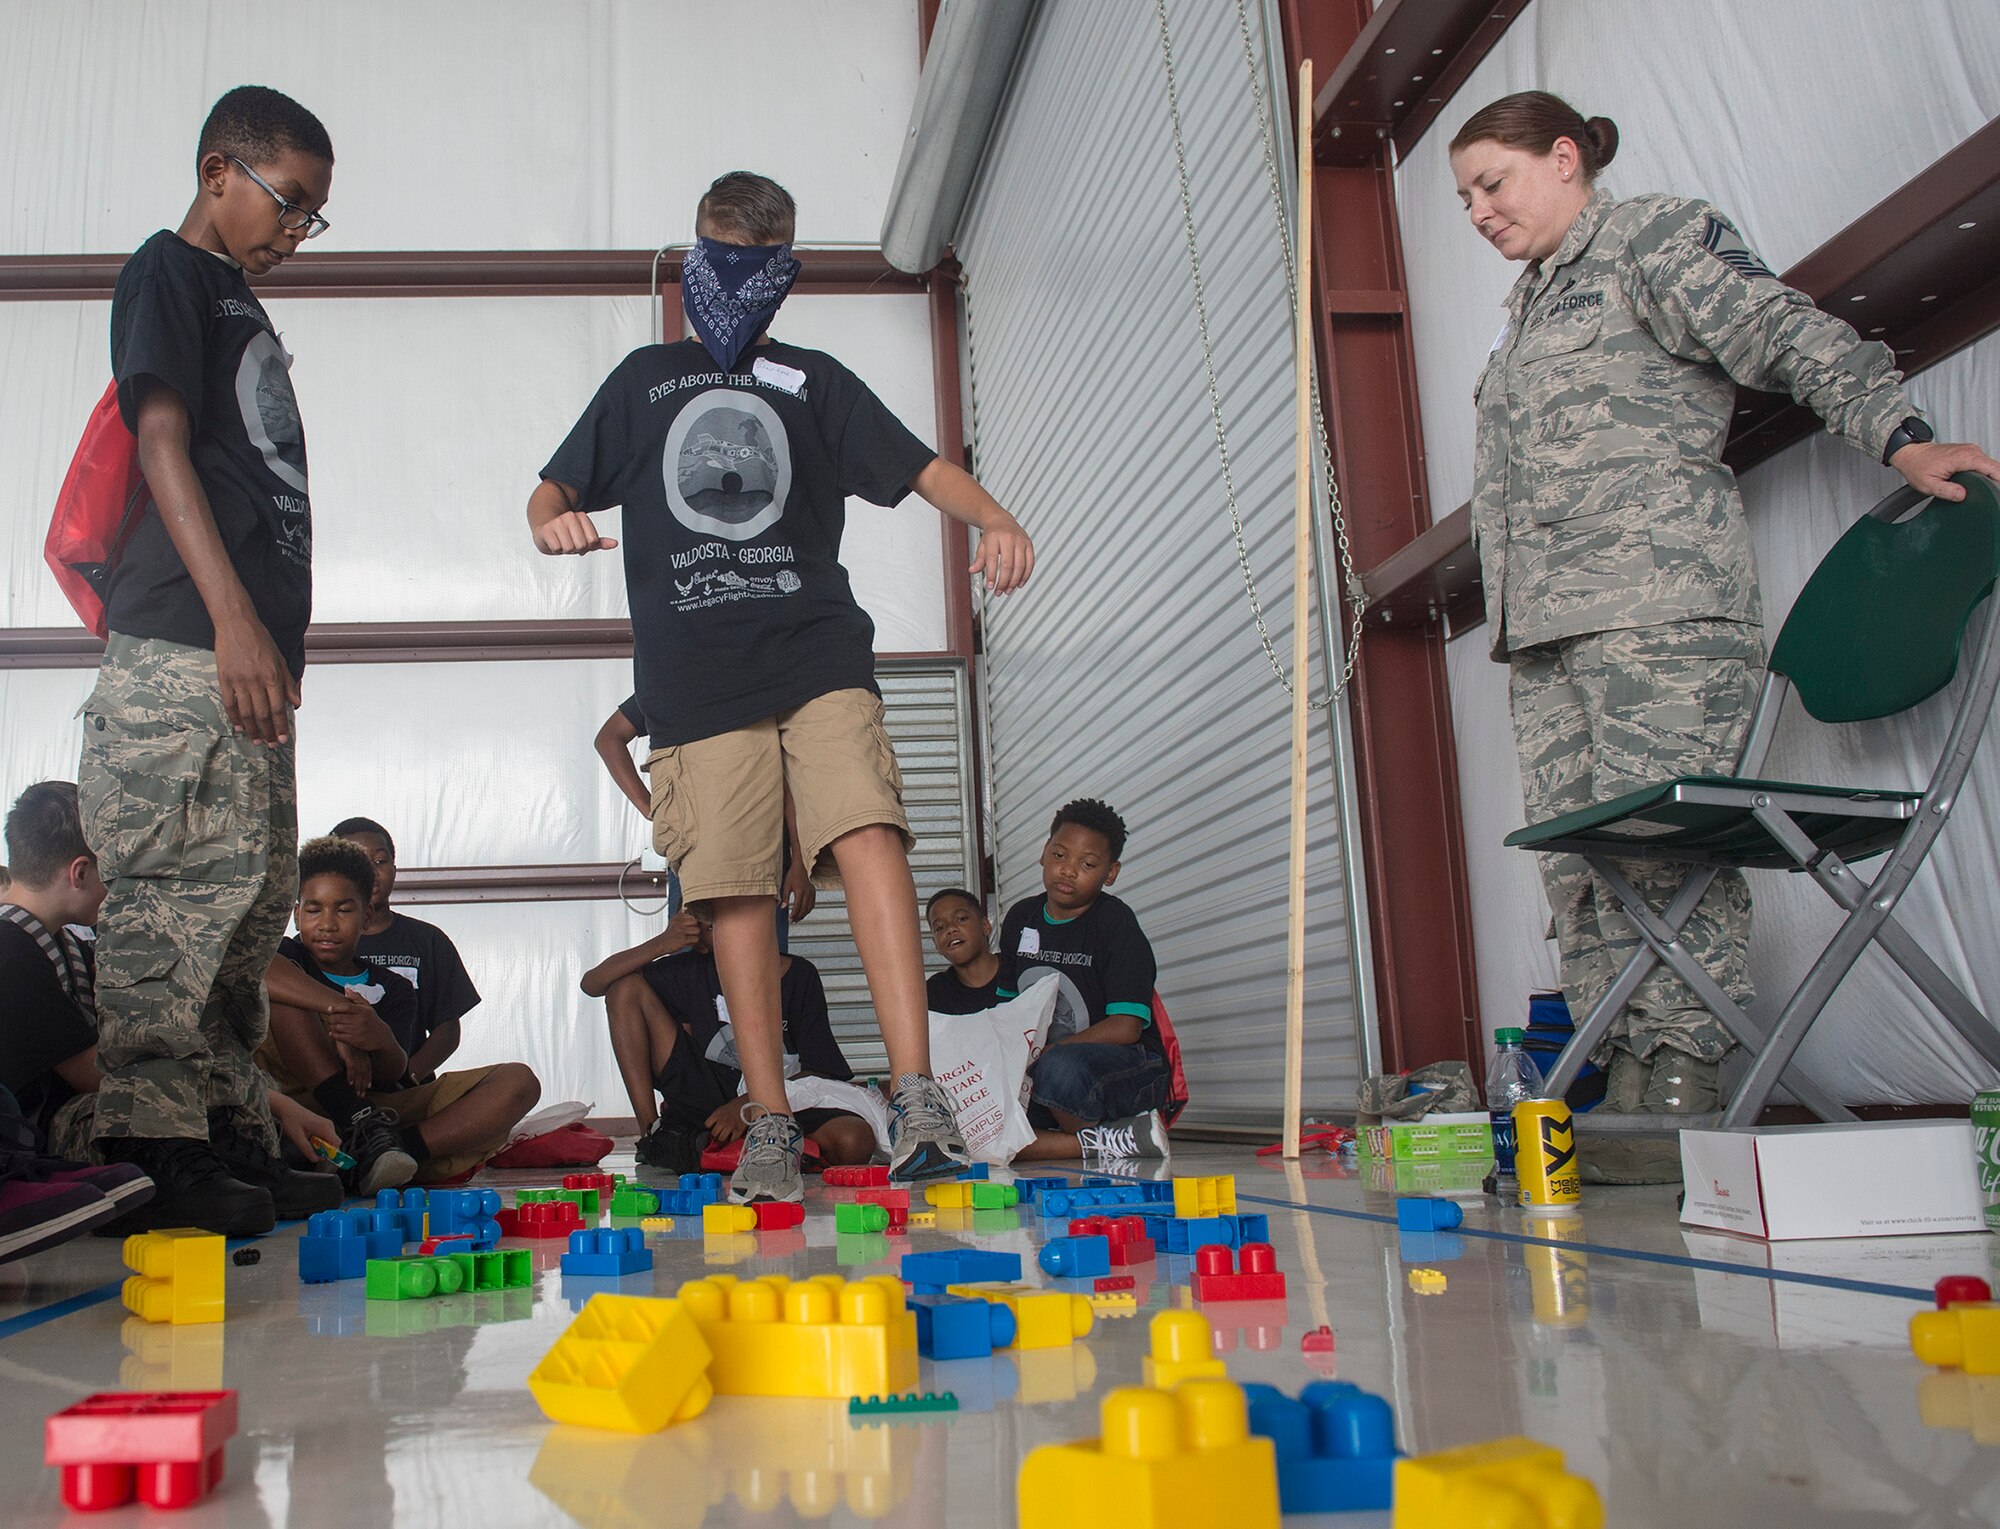 Youth participate in a team-building exercise as a part of the Eyes Above the Horizon diversity outreach program, July 22, 2017, in Valdosta, Ga. The Valdosta Regional Airport welcomed approximately 100 10-19-year-olds as they took the Valdosta skies to commemorate the 76th Anniversary of the historic Tuskegee Airmen. The program focuses on mentoring and familiarizing underrepresented minorities with basic flying fundamentals. (U.S. Air Force photo by Senior Airman Greg Nash) 